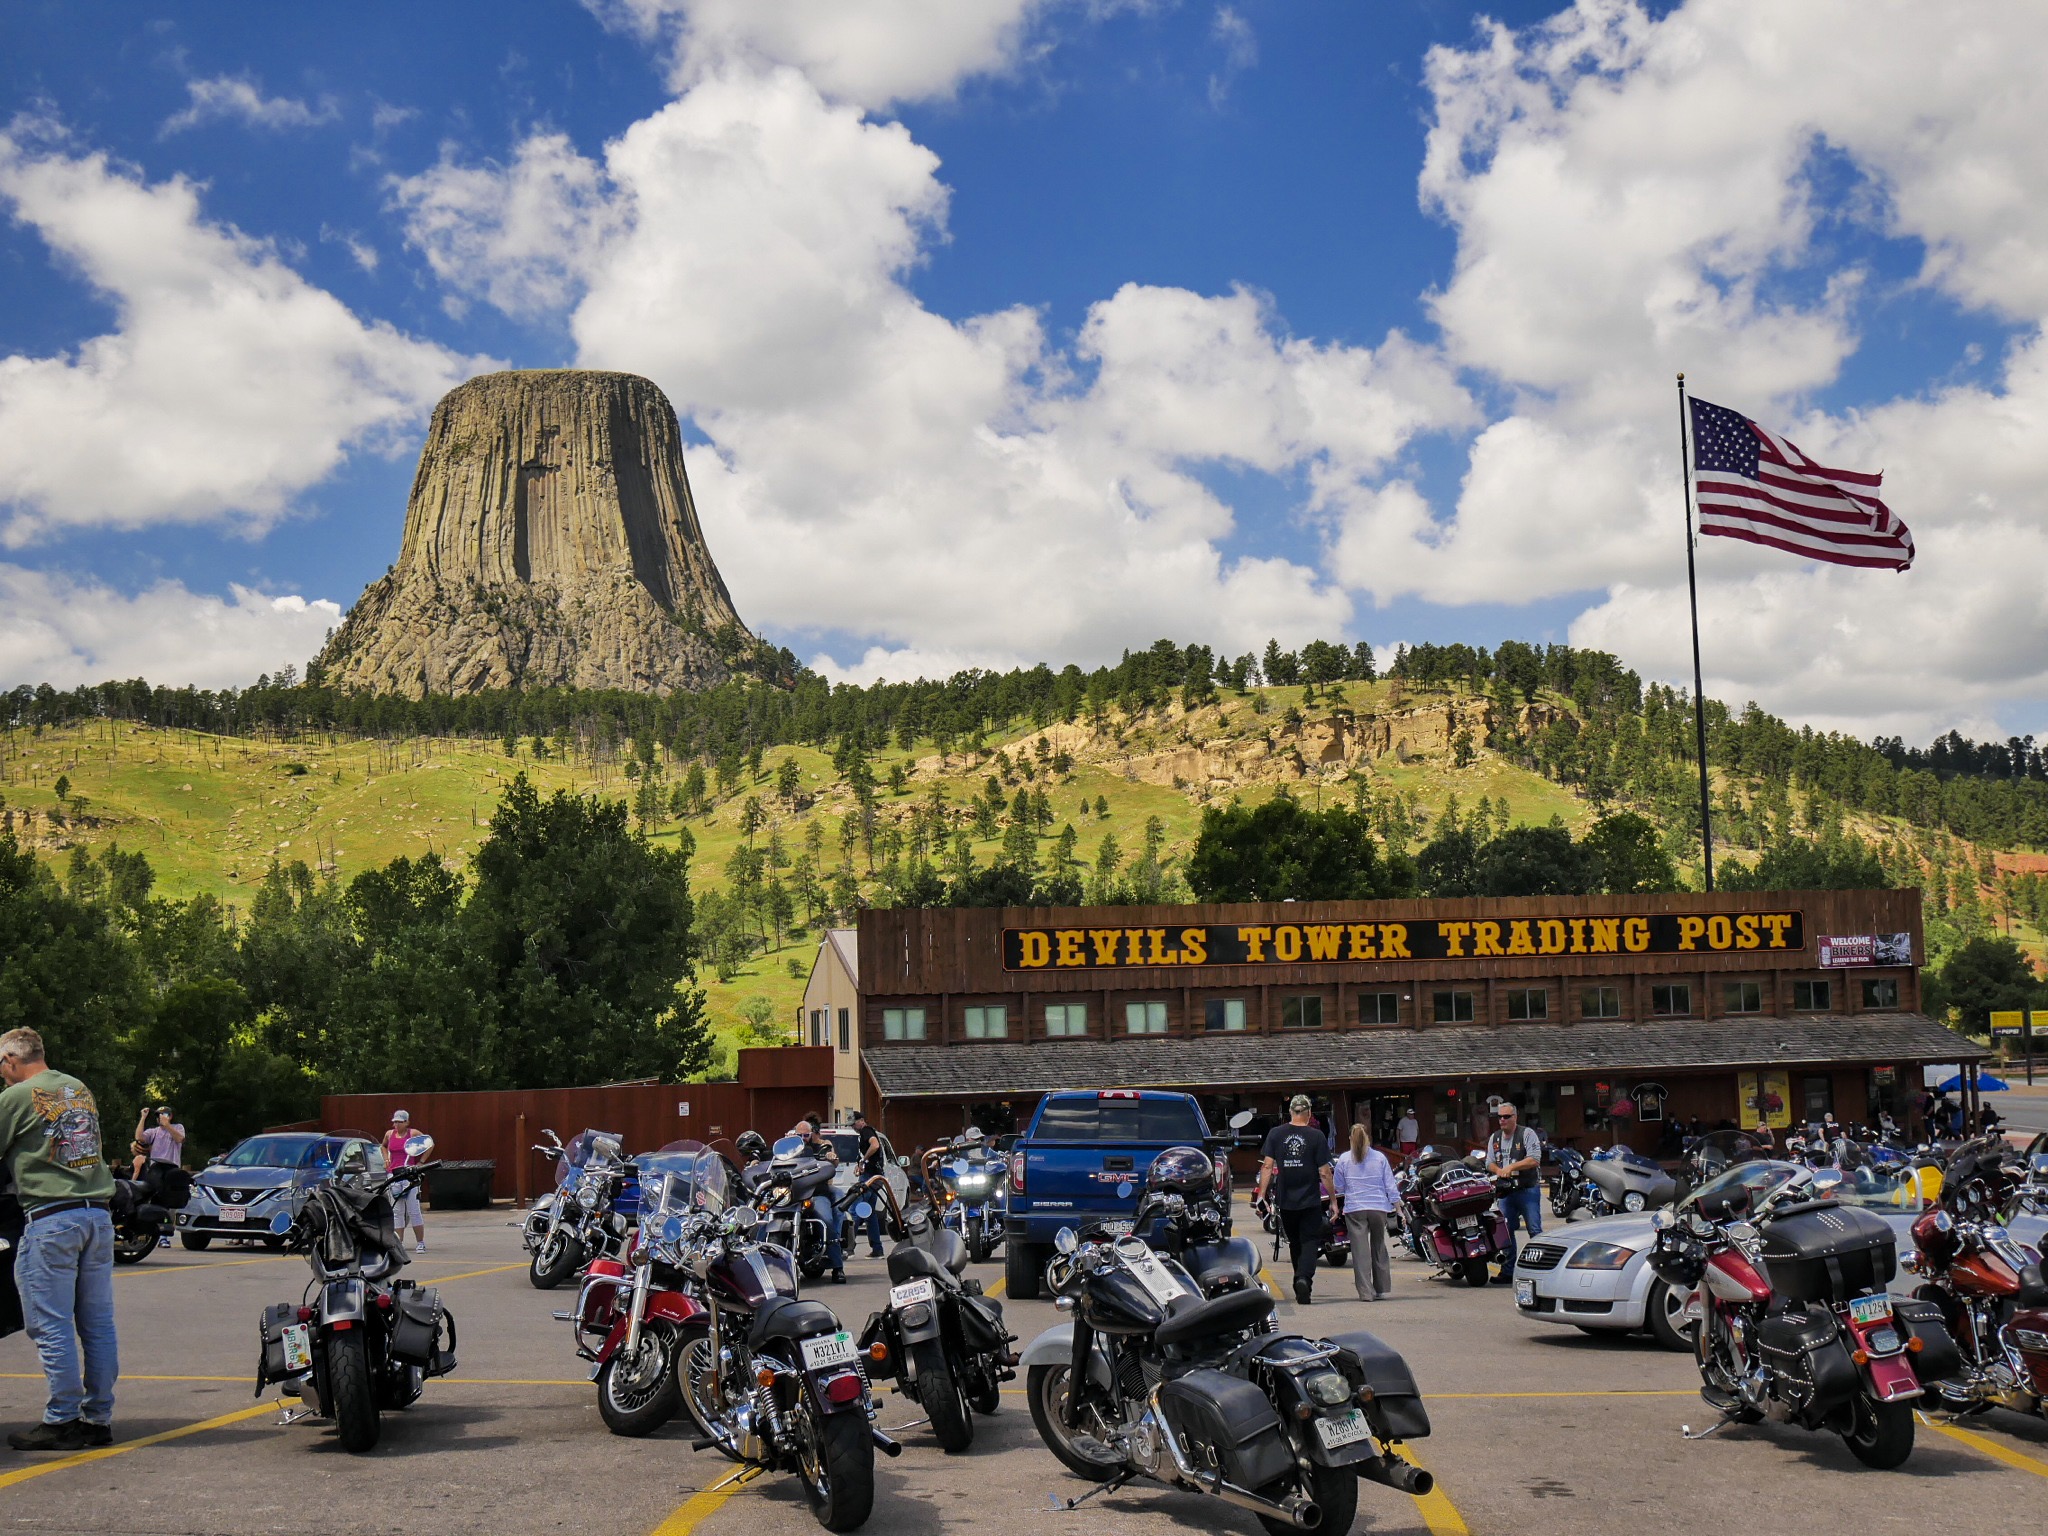 Mount Rushmore in South Dakota and Things to do Nearby